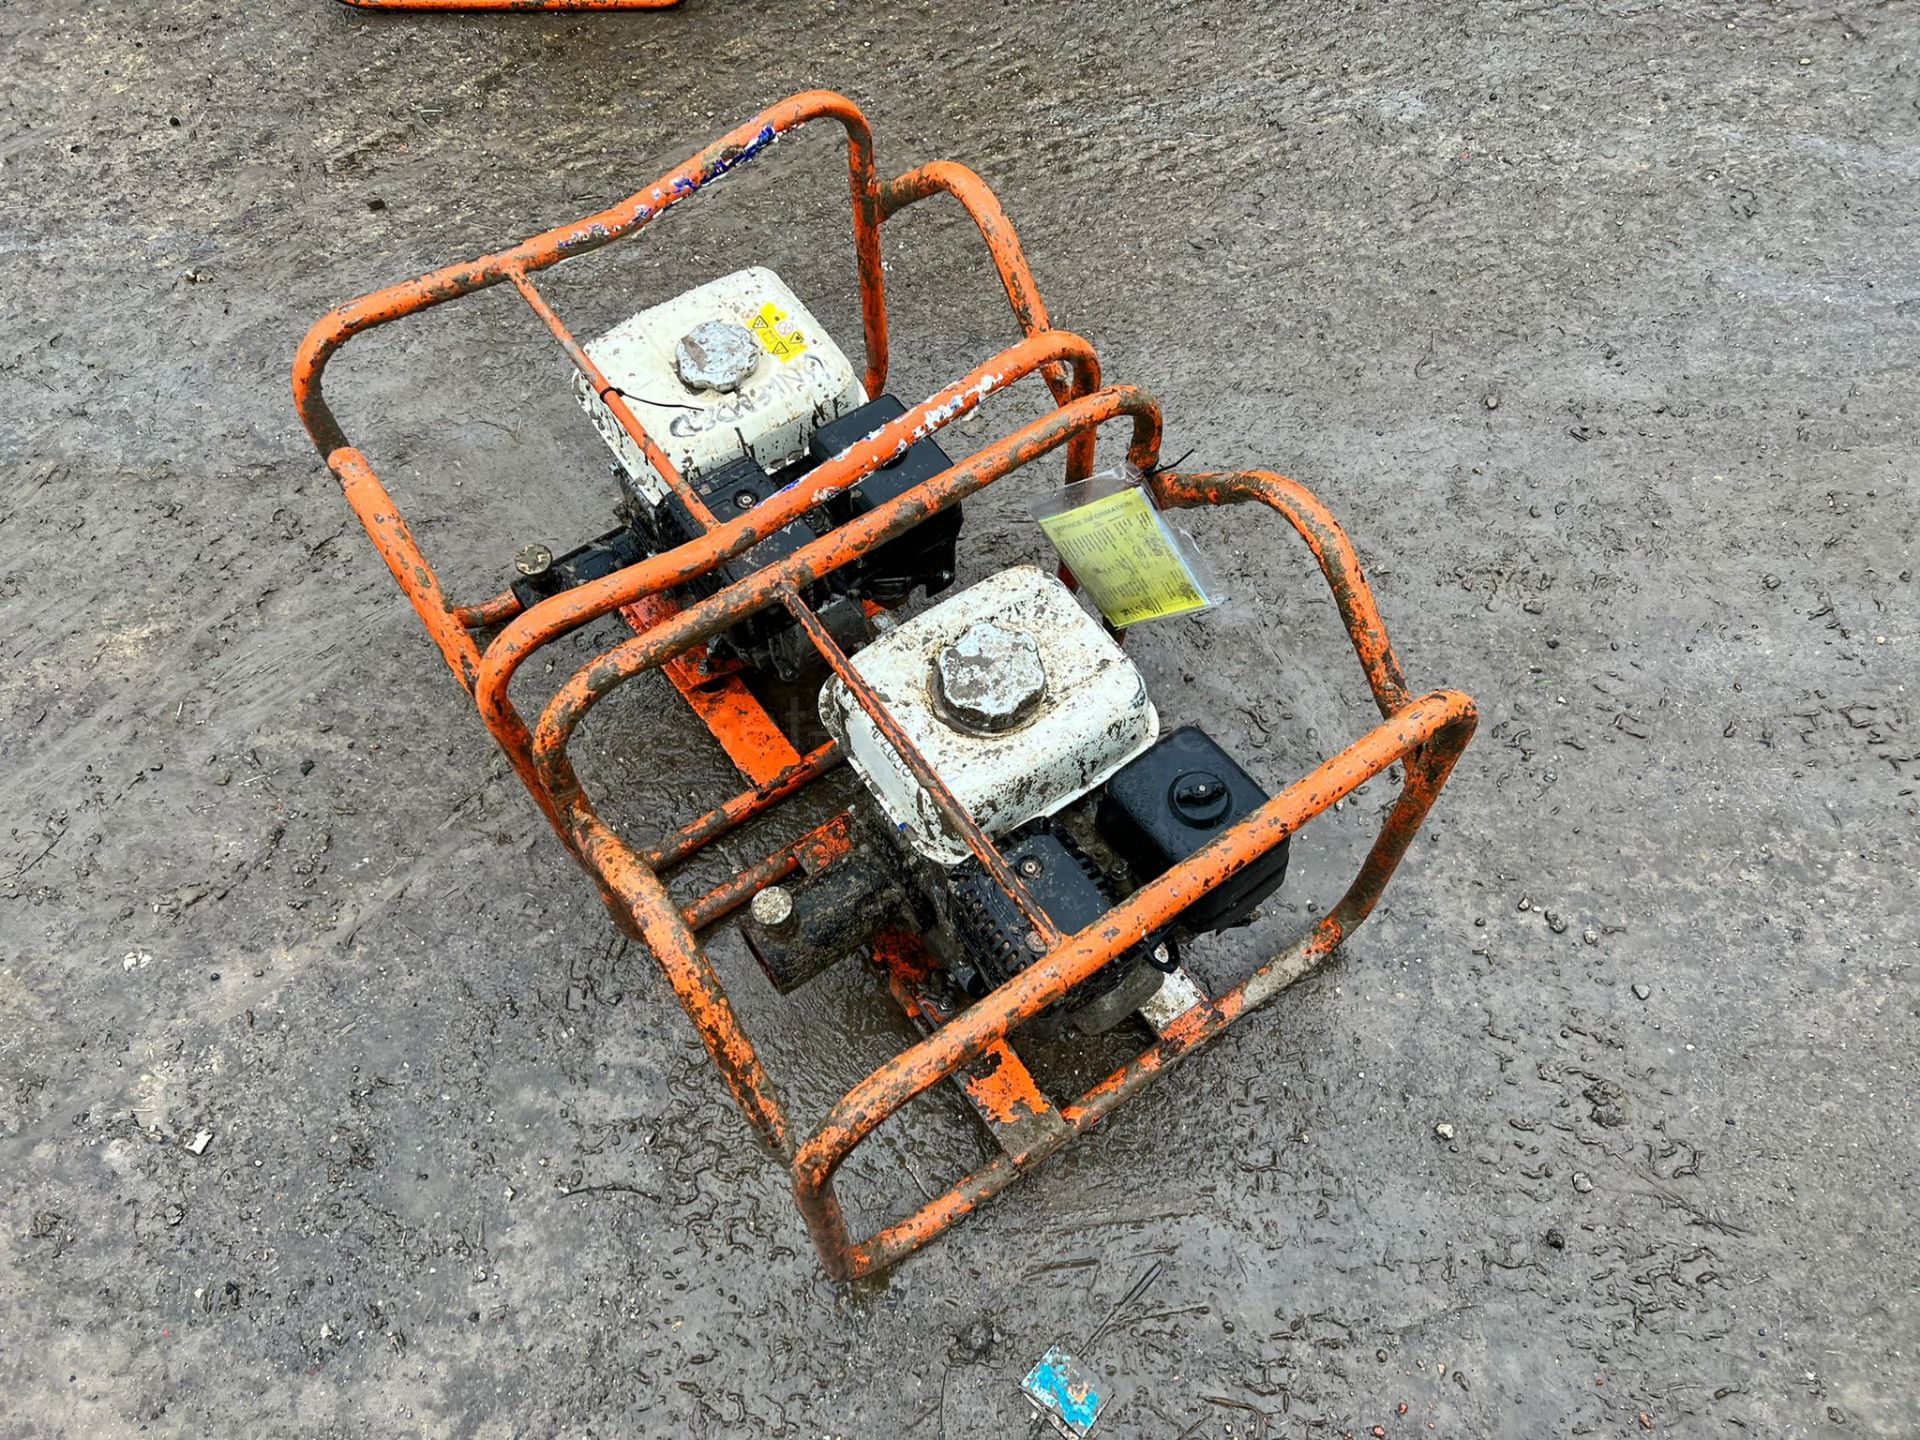 BELLE CONCRETE POKER UNIT, IN WORKING ORDER, HONDA GX160 ENGINE, YOU ARE BIDDING FOR 1 *PLUS VAT* - Image 3 of 8